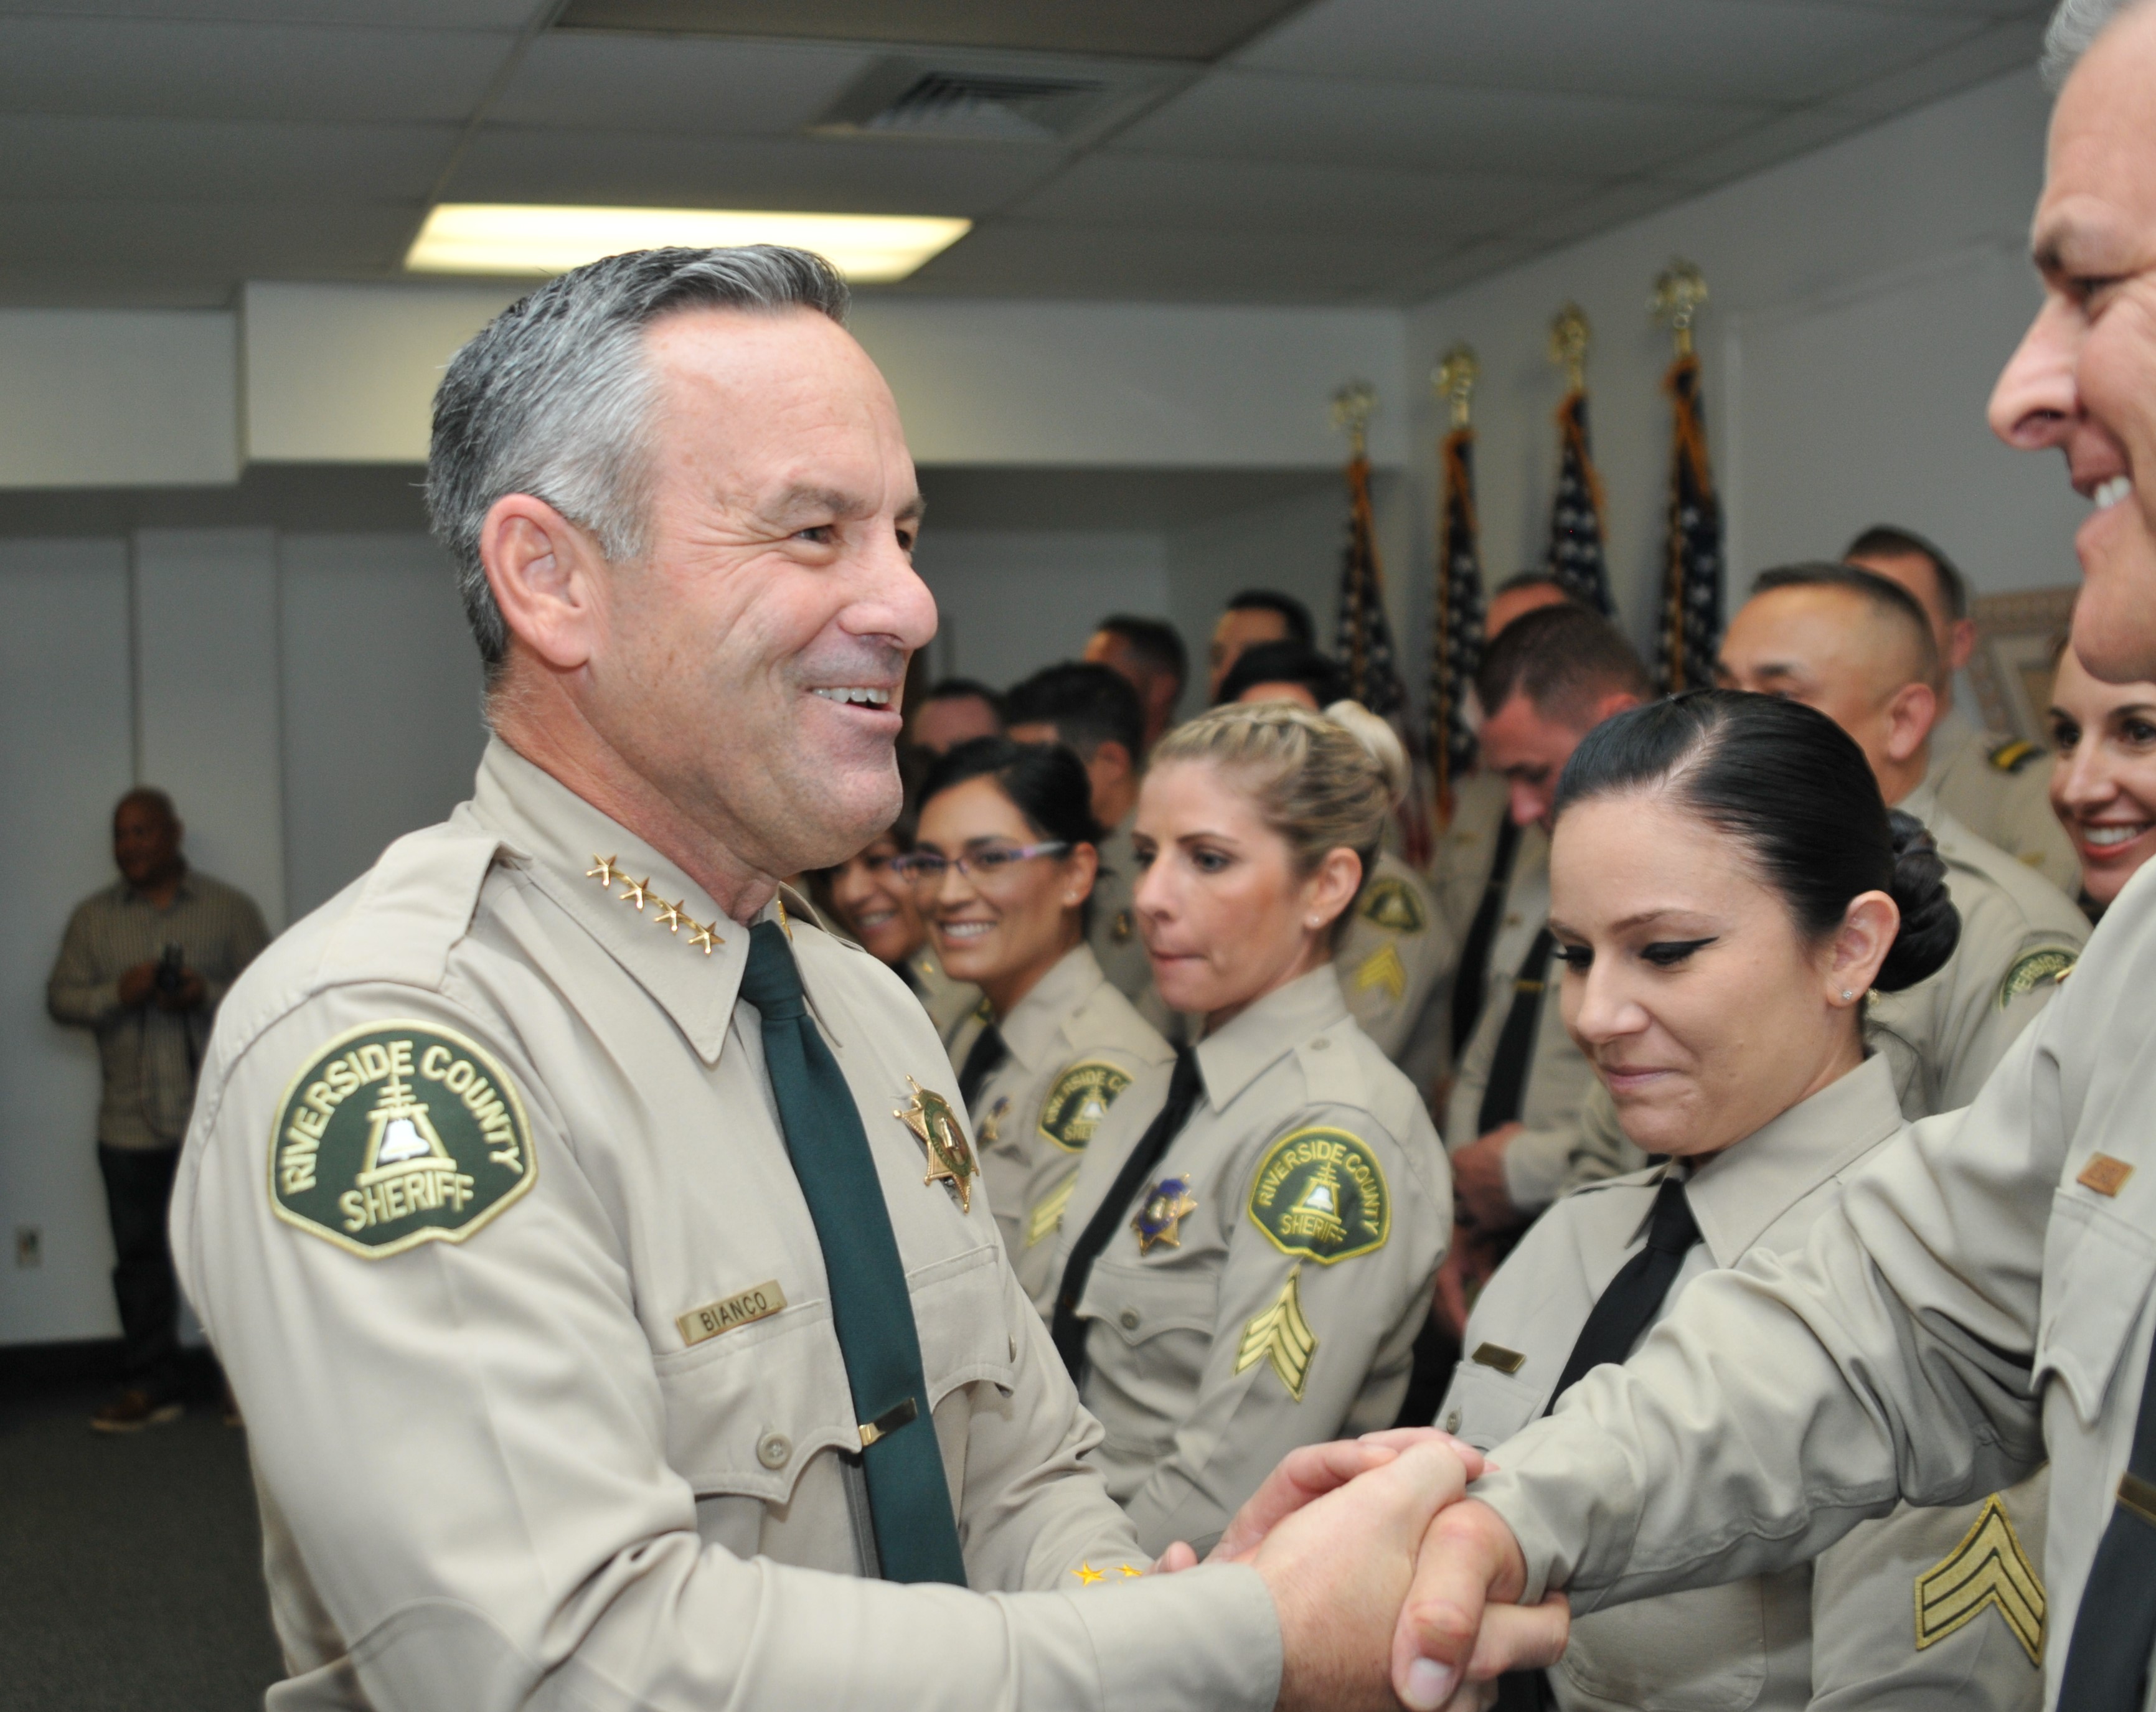 Correctional officer jobs riverside county